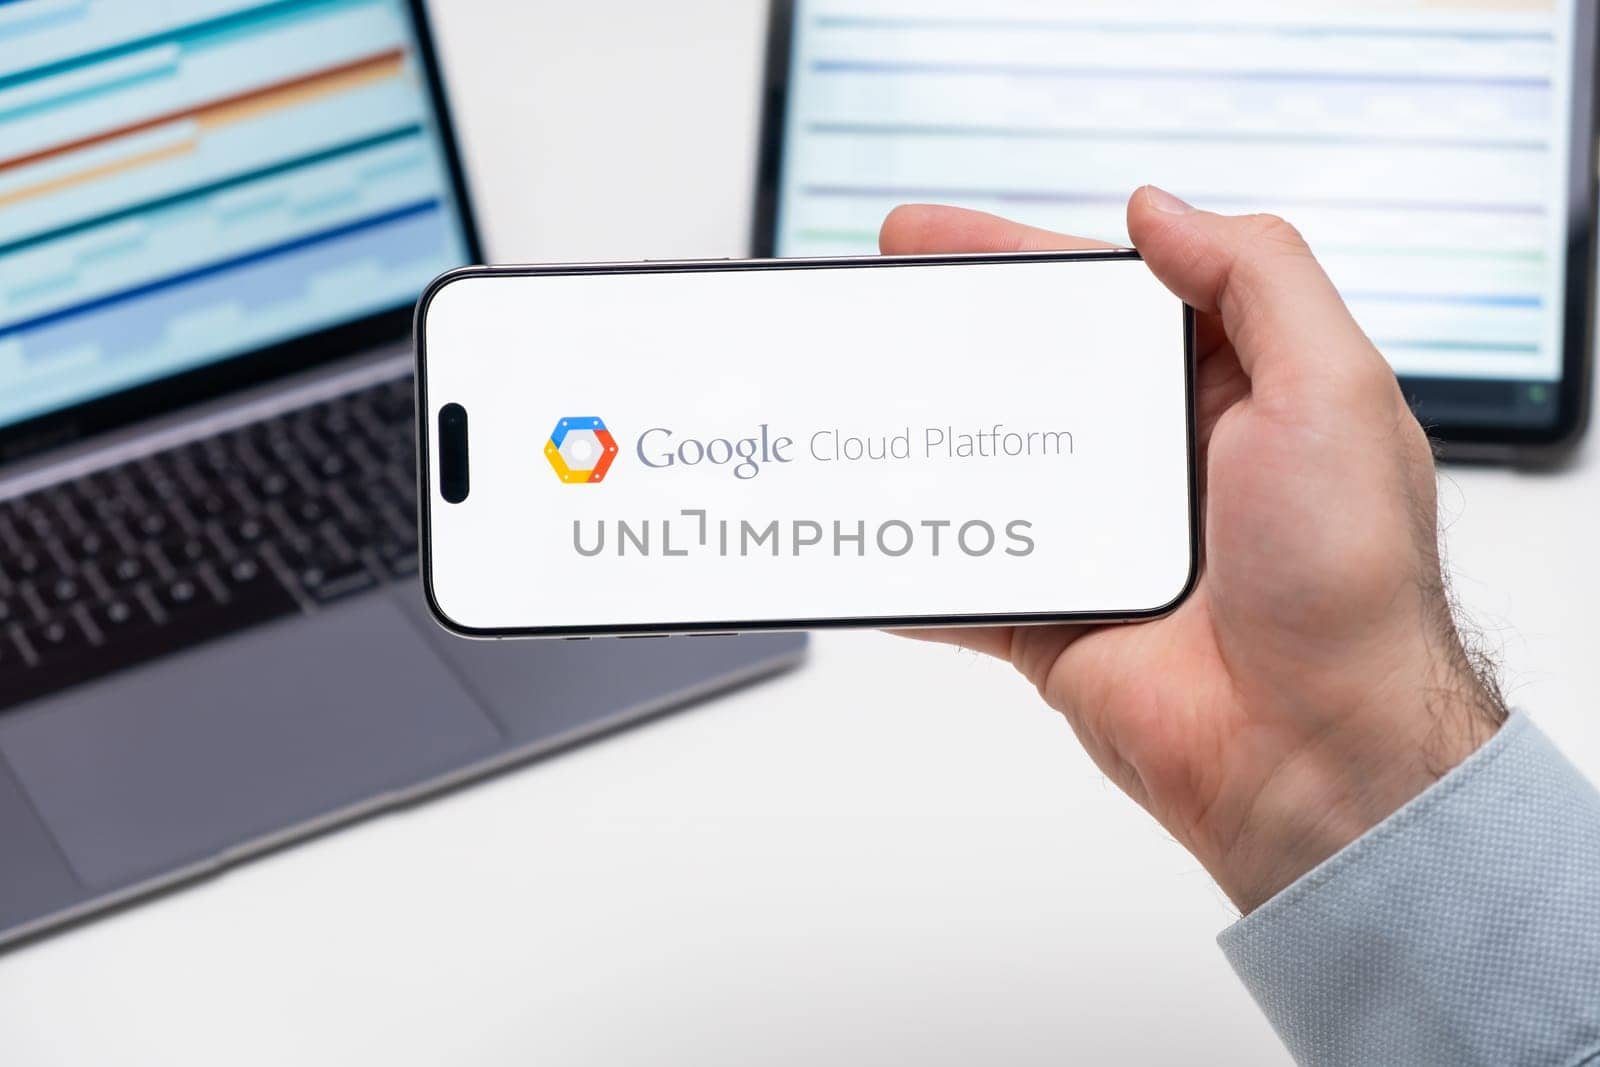 Google Cloud Platform logo of app on the screen of mobile phone held by man in front of the laptop and tablet, December 2023, Prague, Czech Republic